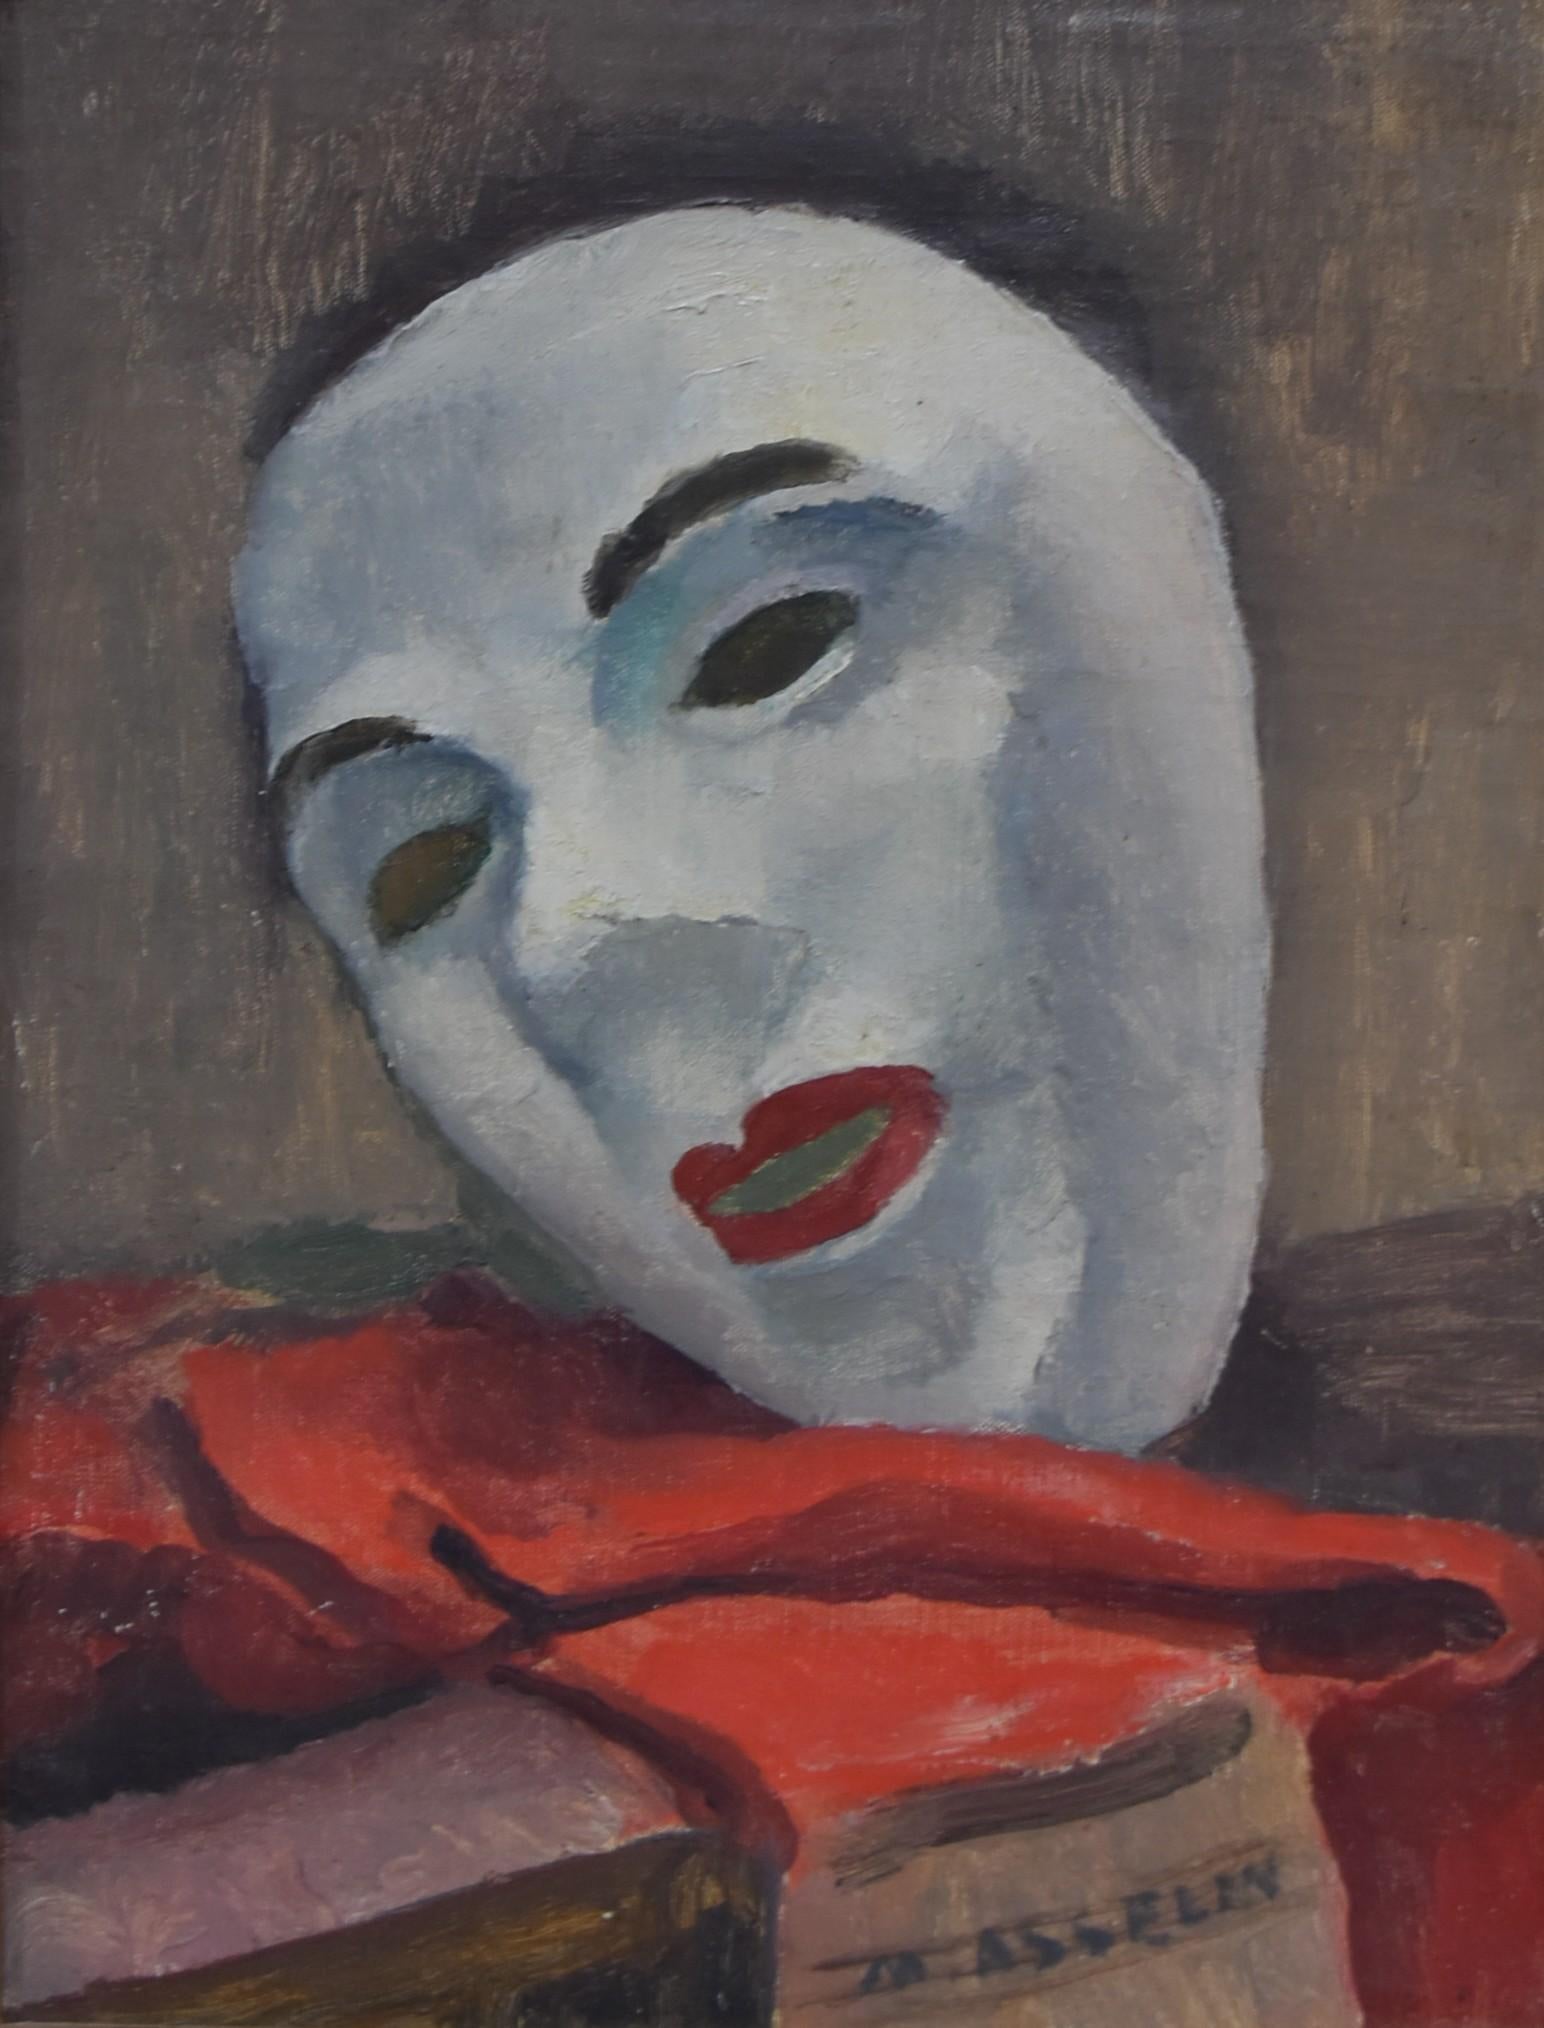 Maurice Asselin (1882-1947) 
Le Masque blanc (The White Mask)
Signed lower right,  
Oil on canvas
35 x 27 cm
In good condition
In its vintage frame : 51 x 43.5 cm

The white mask is an element that can be found in other still lifes by Maurice